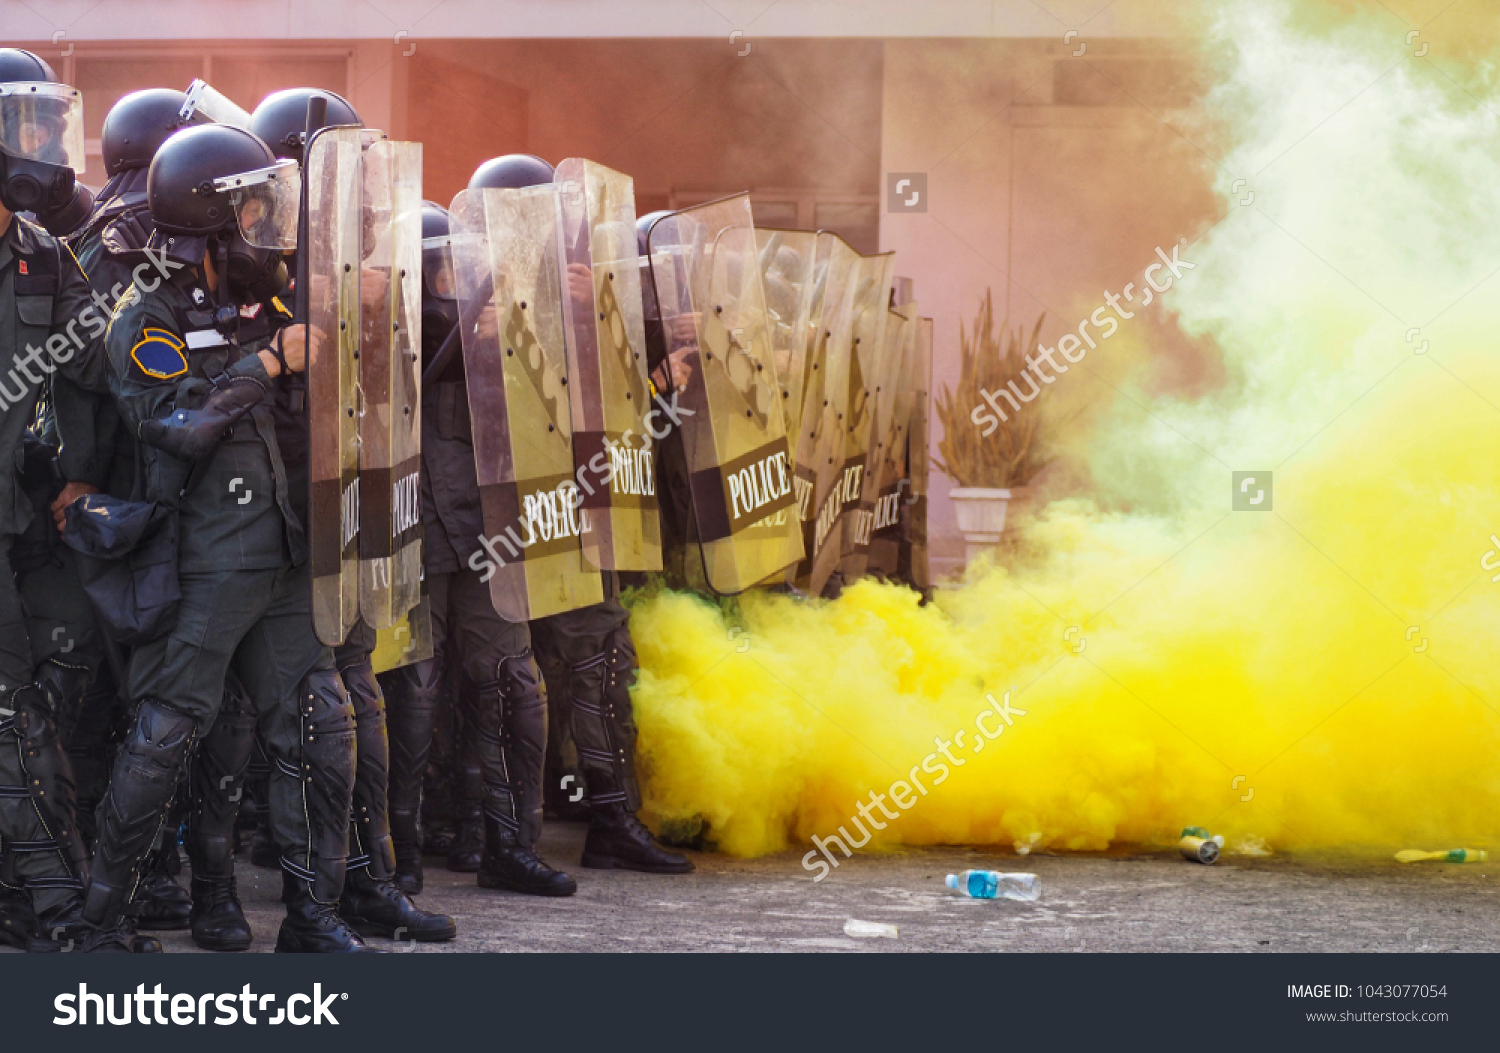 Group riot police with protective gear and shields surrounded by tear gas and yellow color smoke bomb in tactical training #1043077054